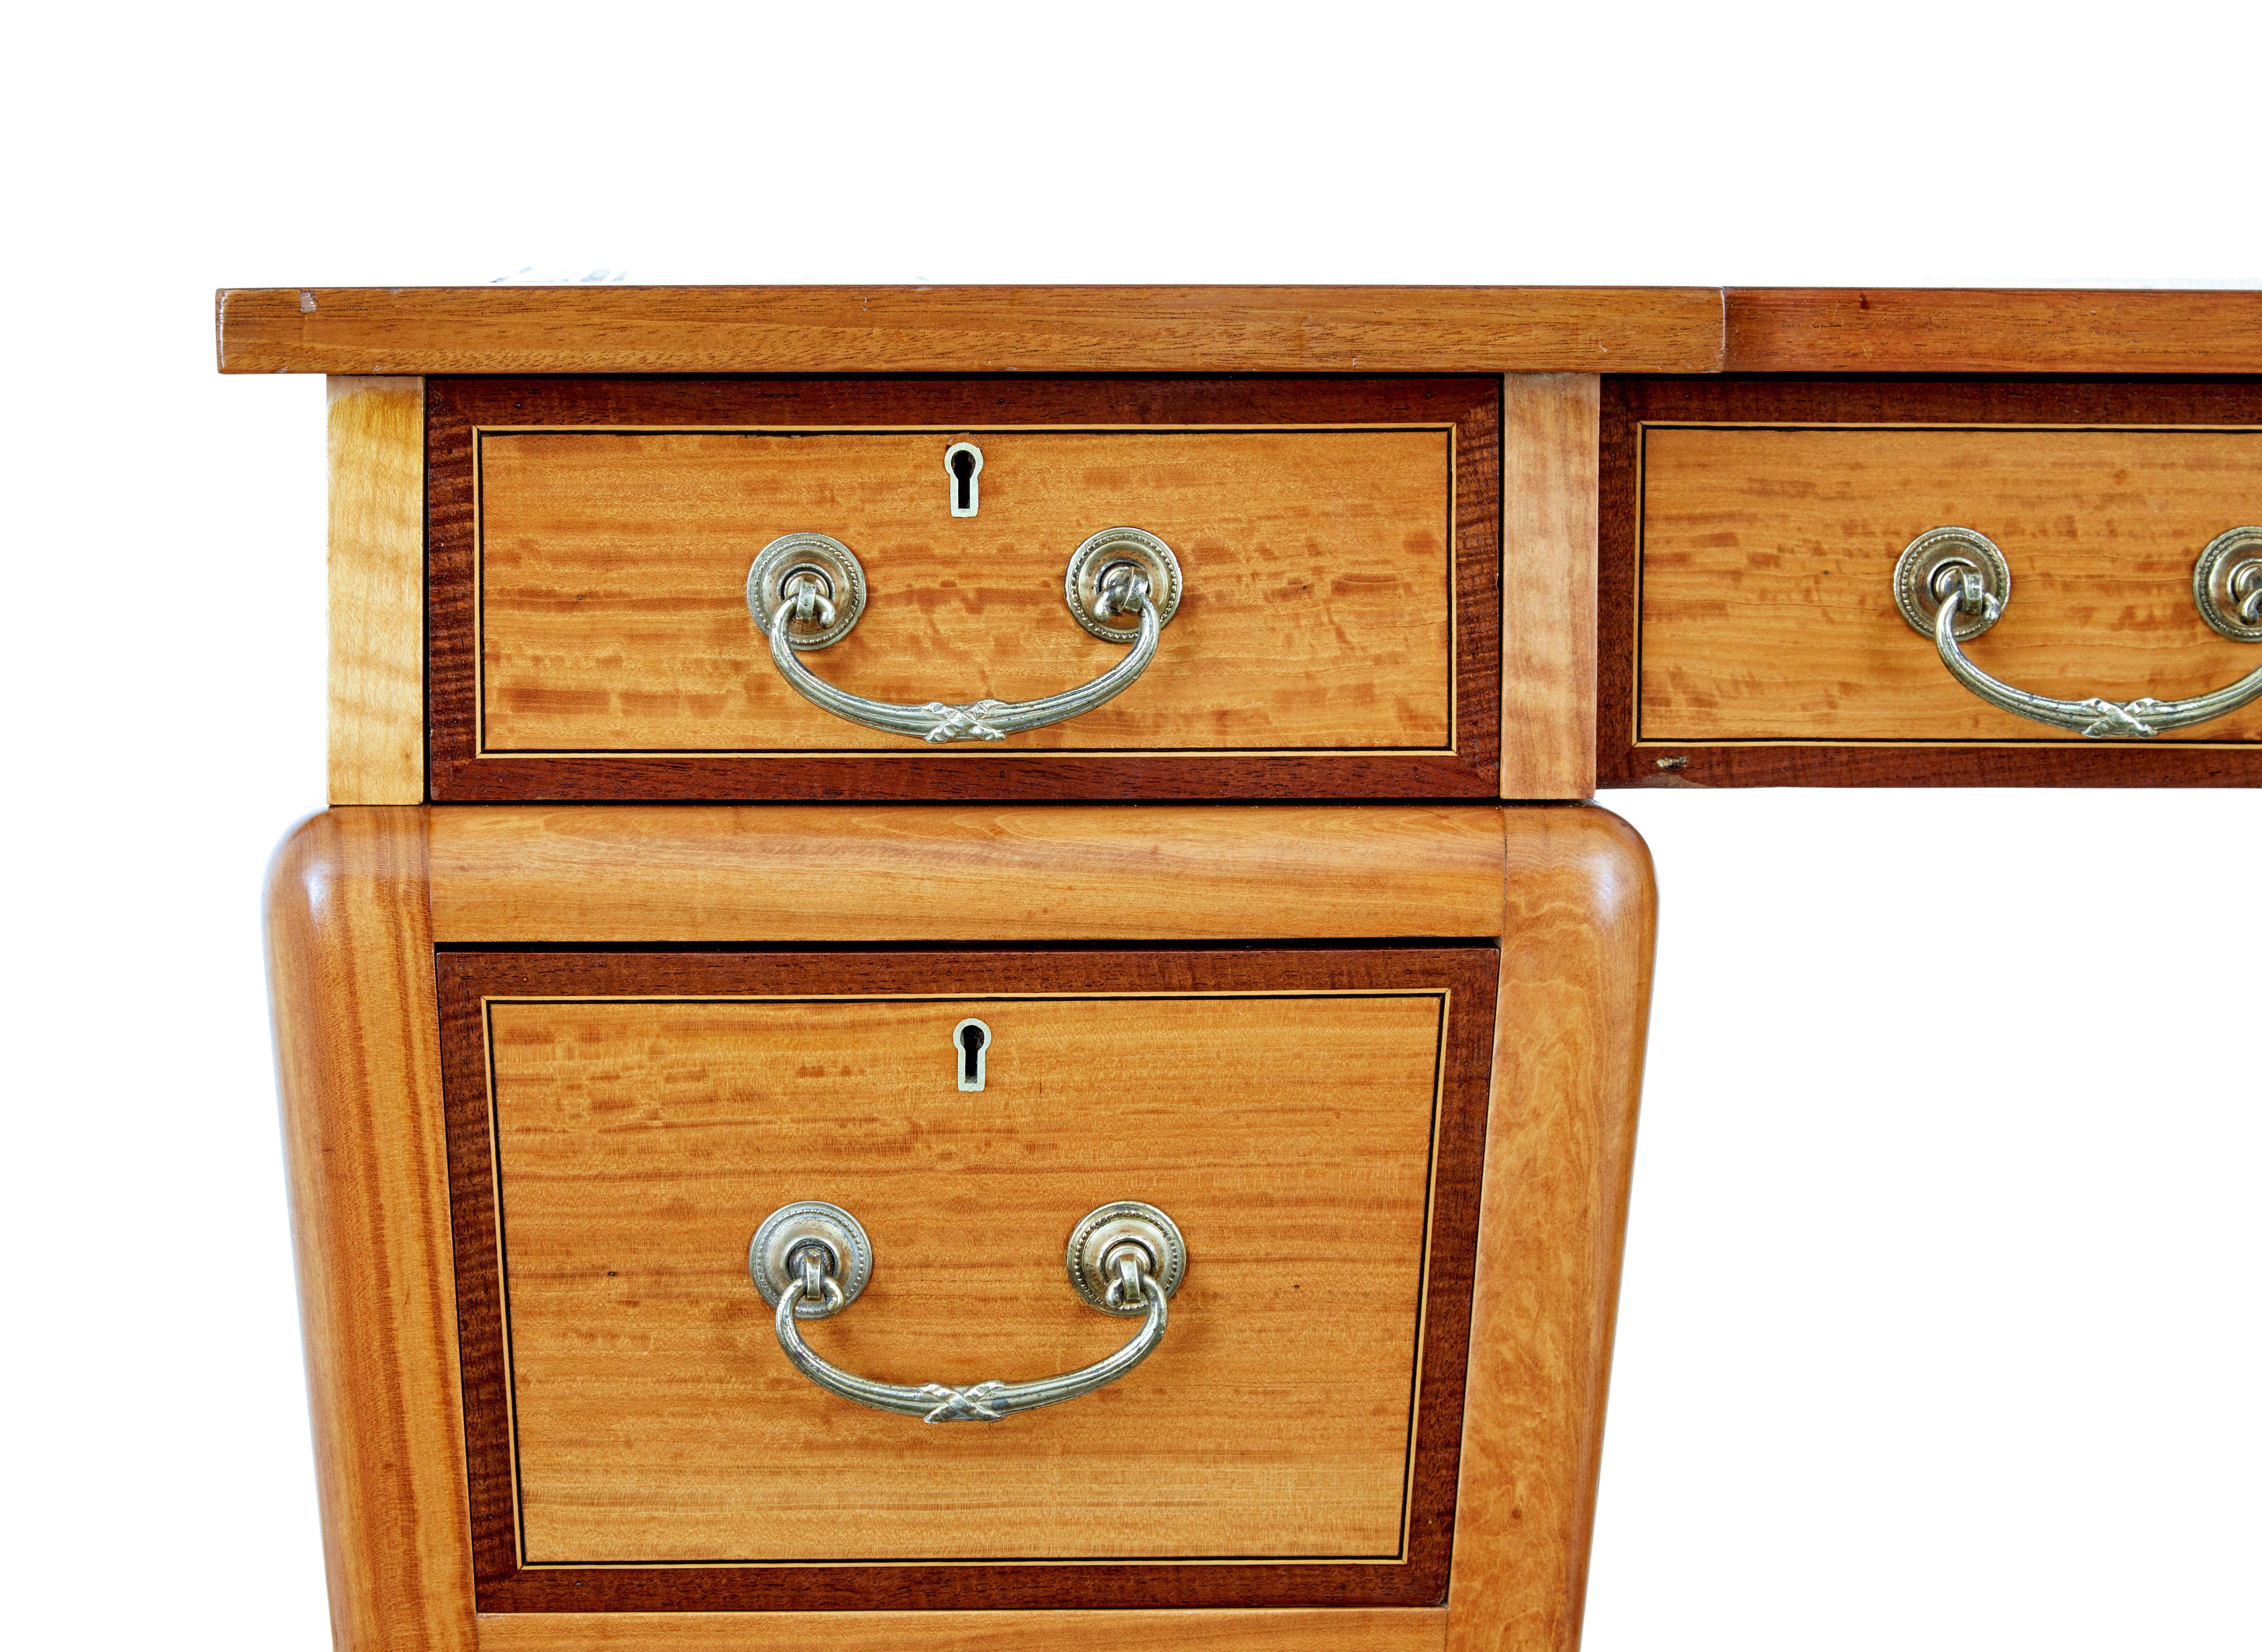 20th Century Early 20th century satinwood sheraton revival desk For Sale